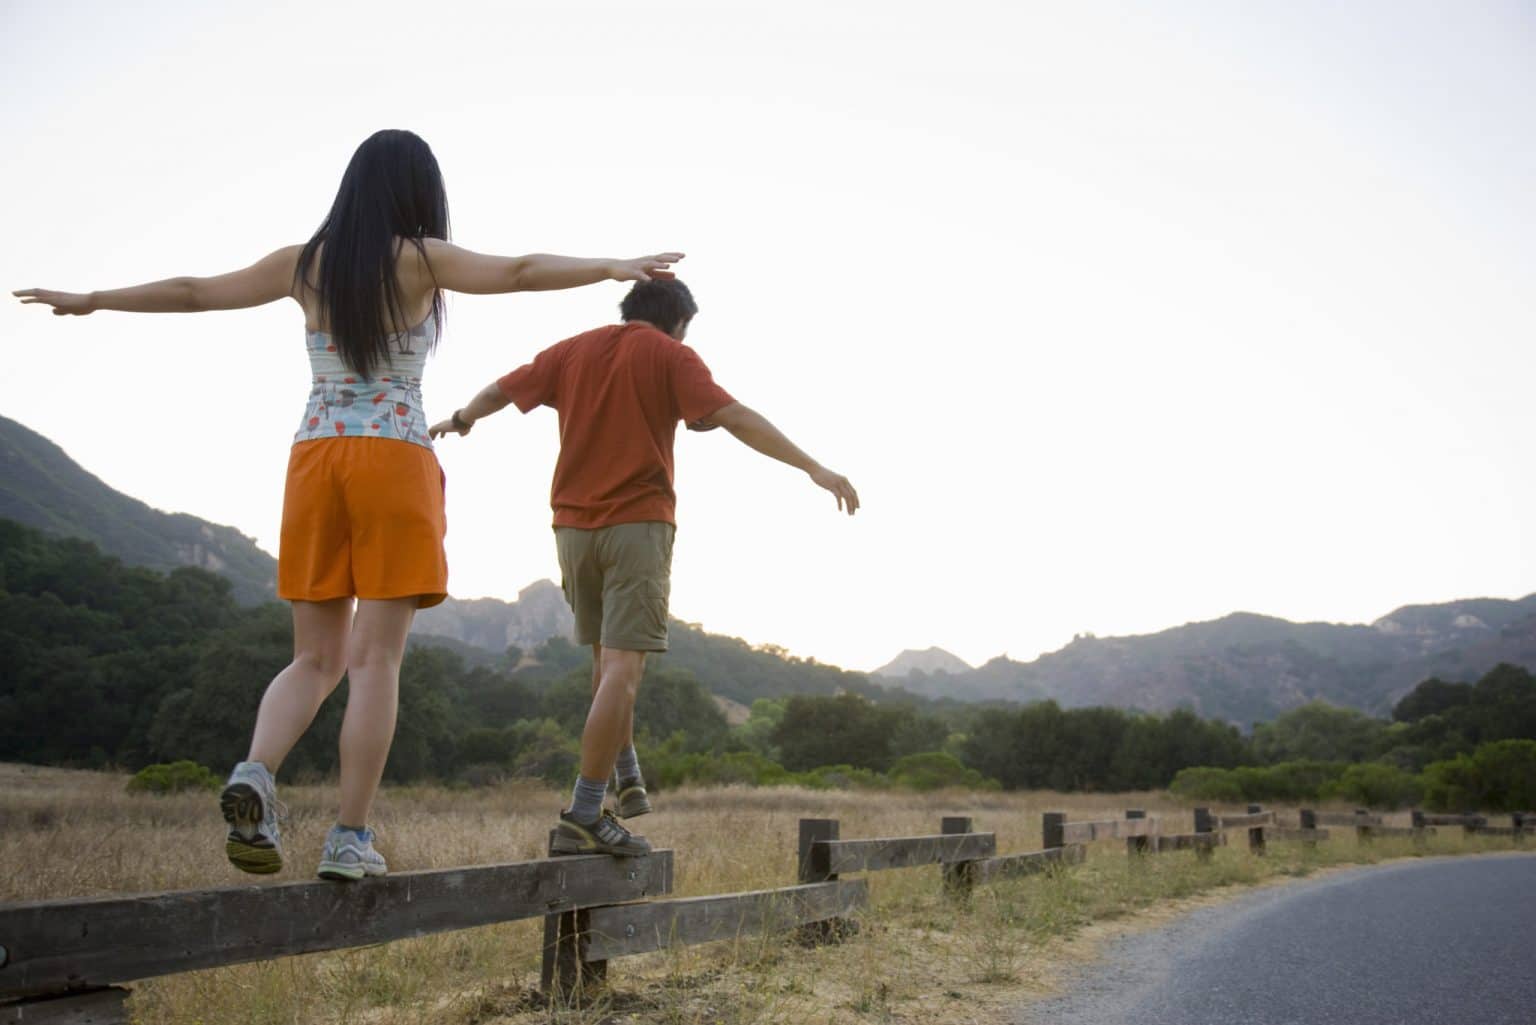 Two people walking on a short fence with their arms out while balancing and not facing the camera